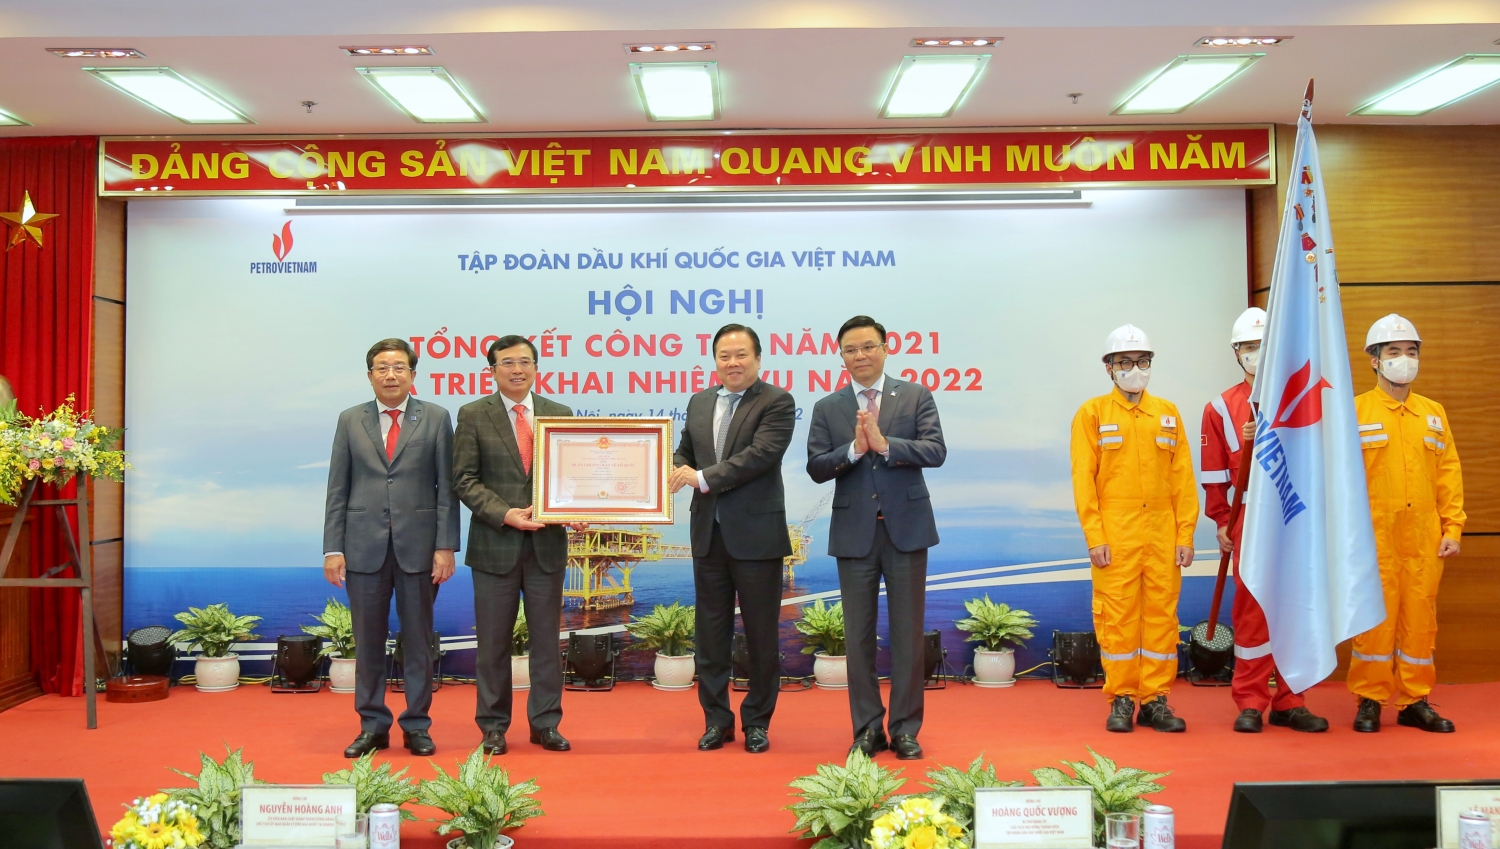 Petrovietnam overcomes challenges, grows spectacularly